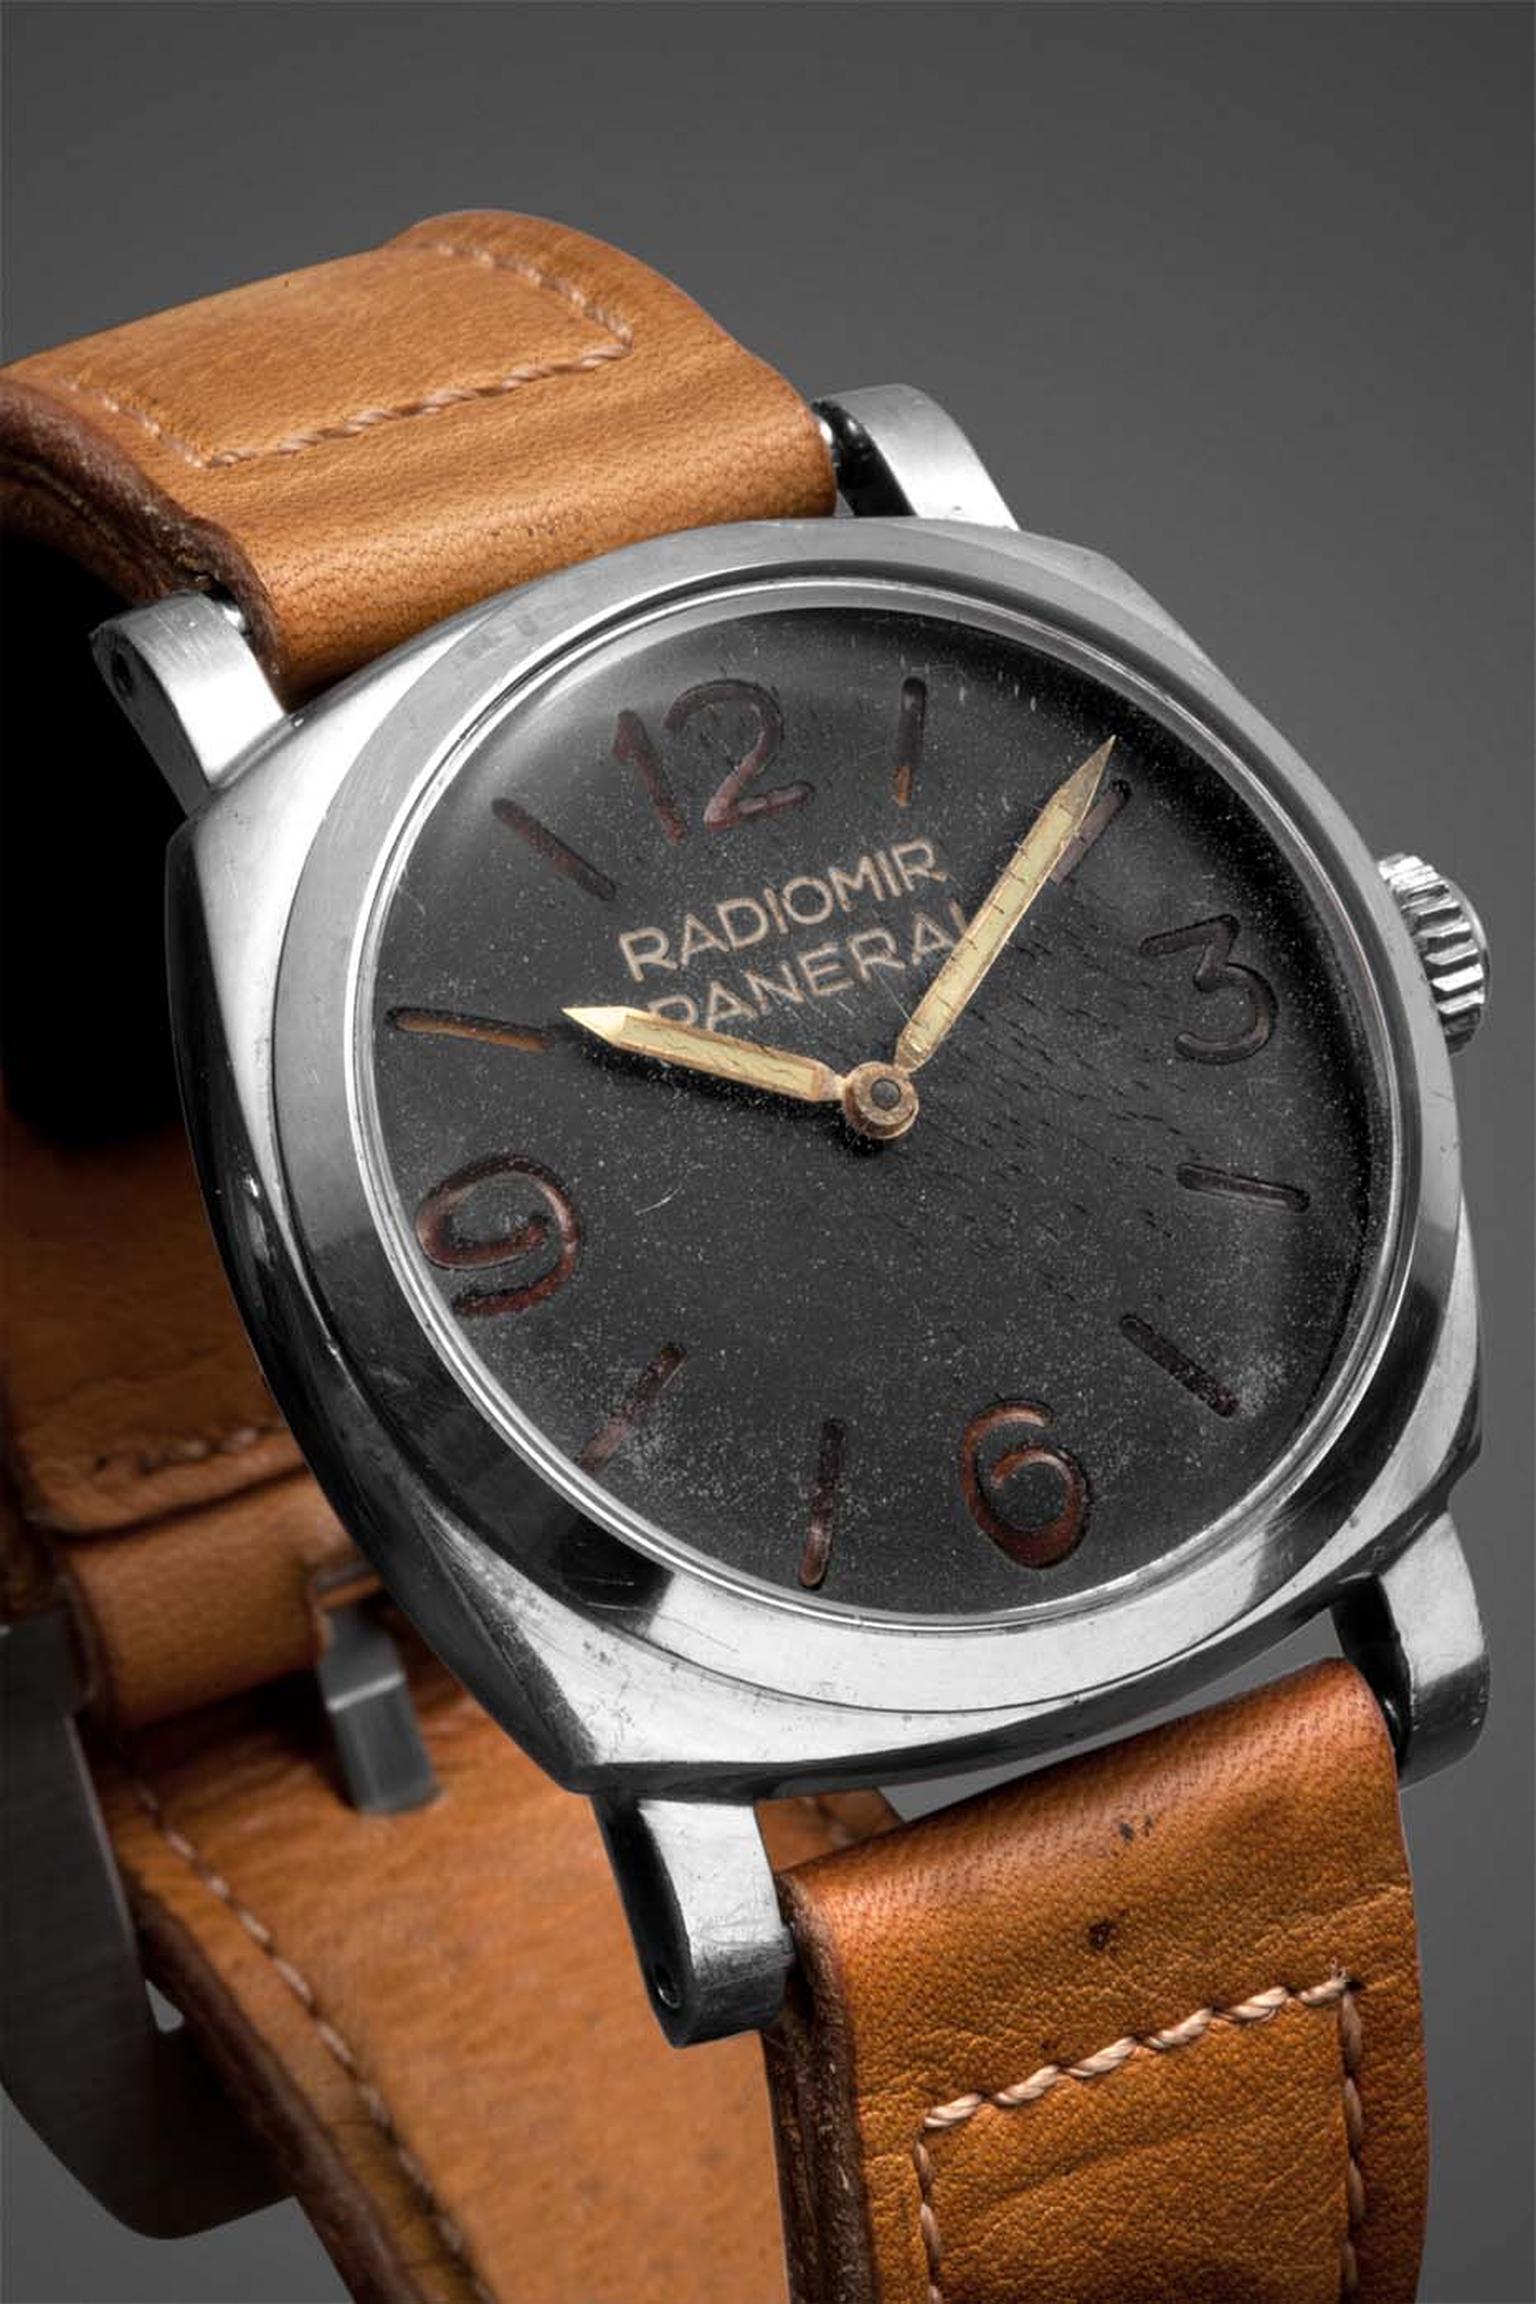 By 1940 the Panerai Radiomir watch assumed its definitive physiognomy. With a stronger case made from a single block of steel for increased underwater resistance and reinforced lugs, the dial of the watch was simplified with just four large Arabic numeral